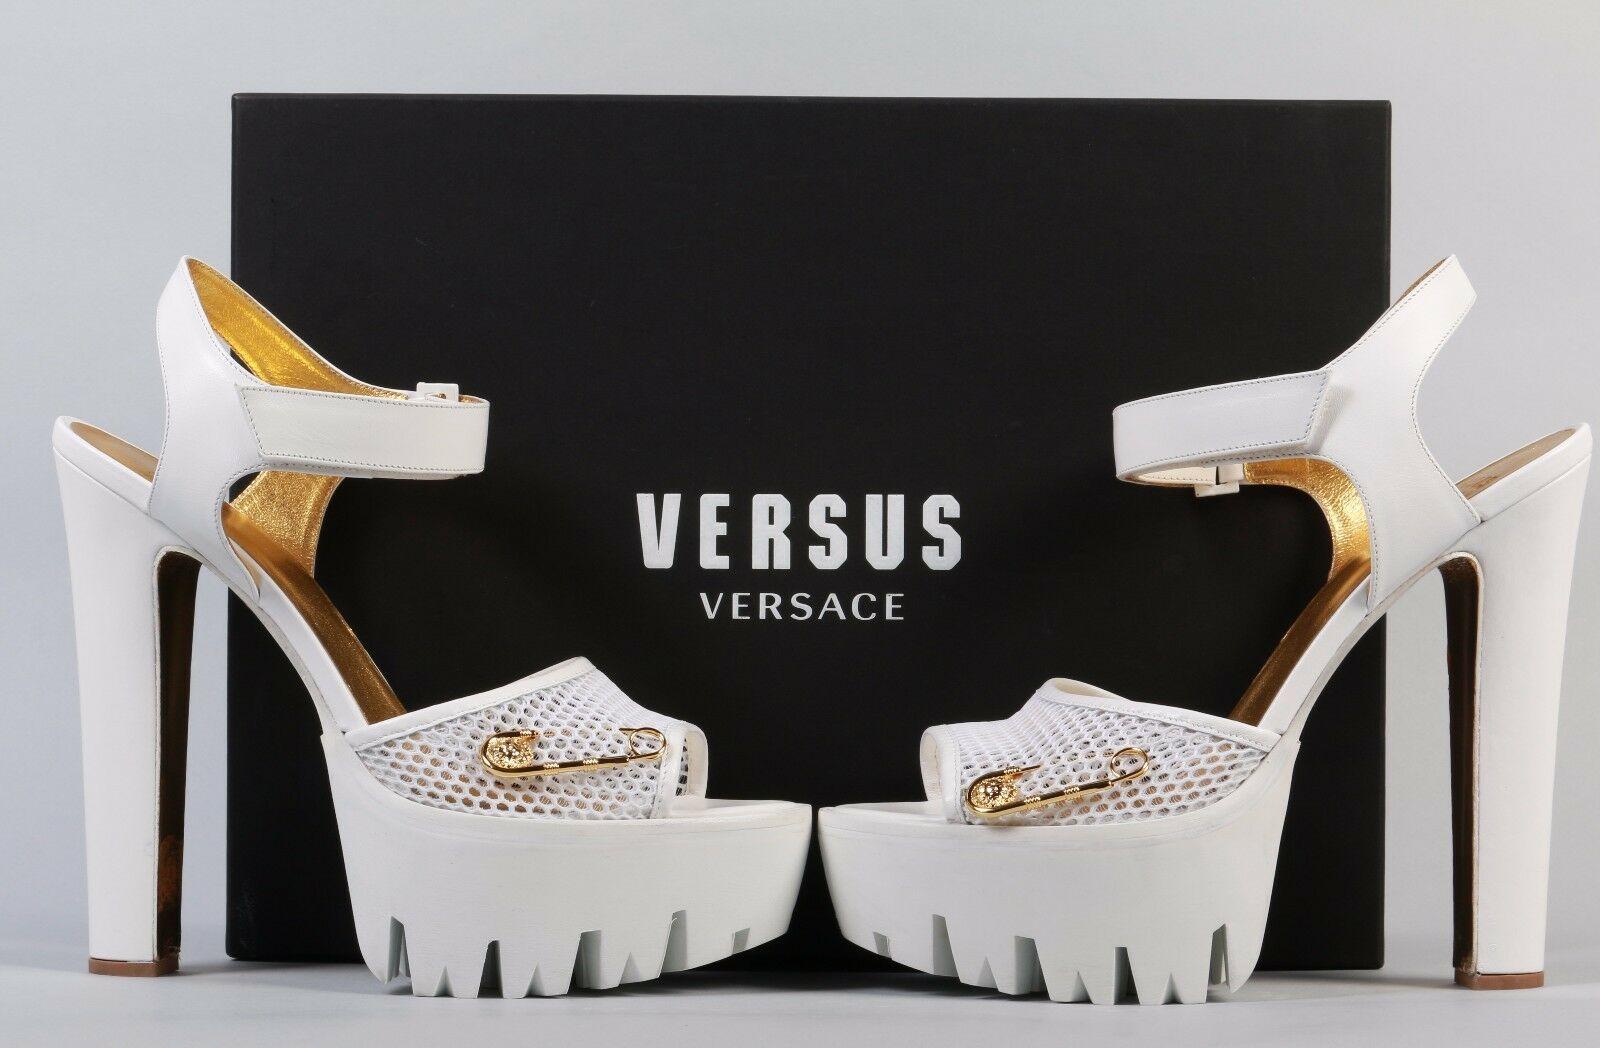 New Versace Versus + Anthony Vaccarello White Platform Sandals 40.5 - 10.5 For Sale 3